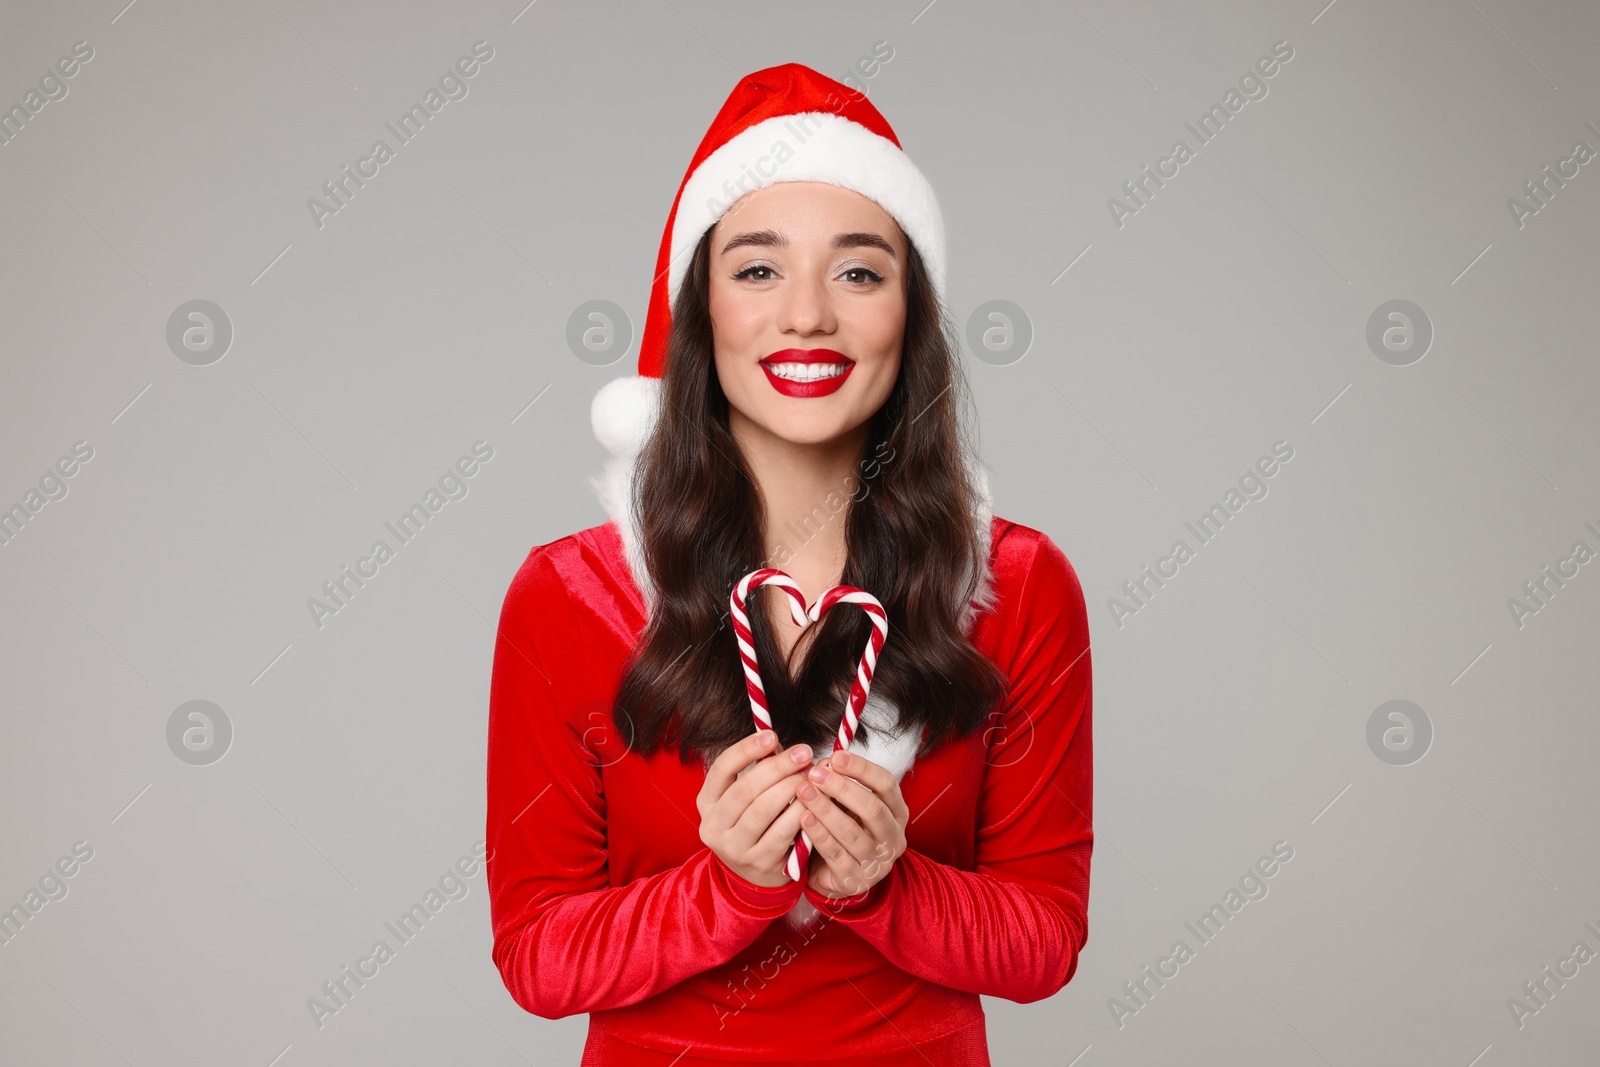 Photo of Christmas celebration. Beautiful young woman in Santa hat and red dress with candy canes on grey background